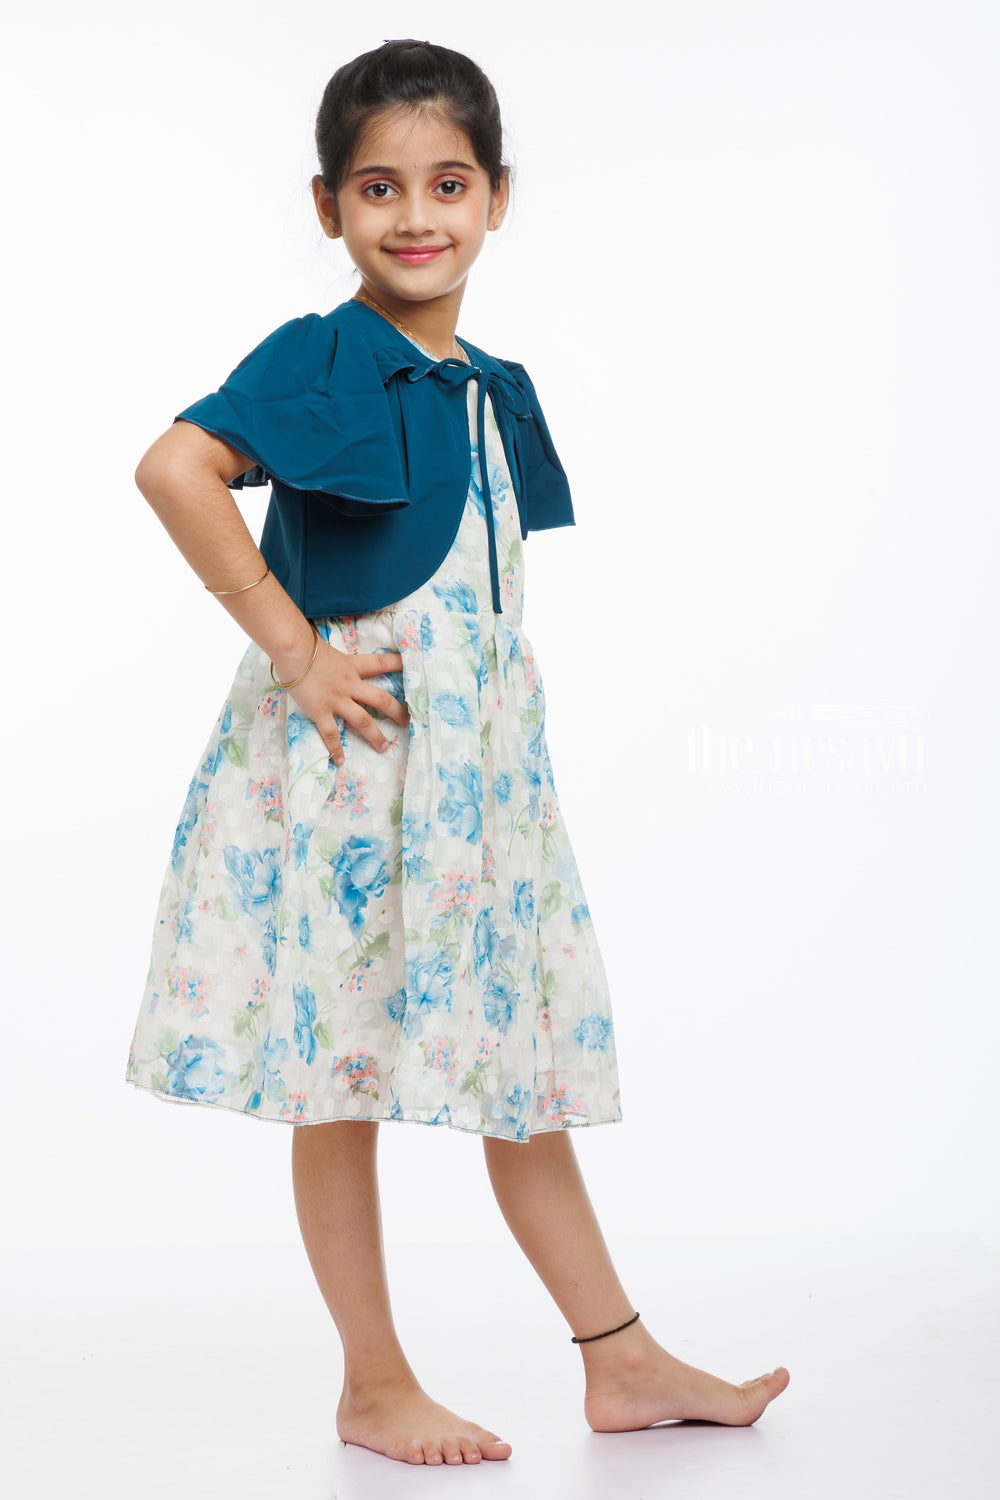 The Nesavu Girls Fancy Frock Chic Blue Floral Cotton Dress with Stylish Jacket for Girls Nesavu Girls Summer Cotton Dress with Jacket | Elegant Floral Maxi  Stylish Bolero | The Nesavu